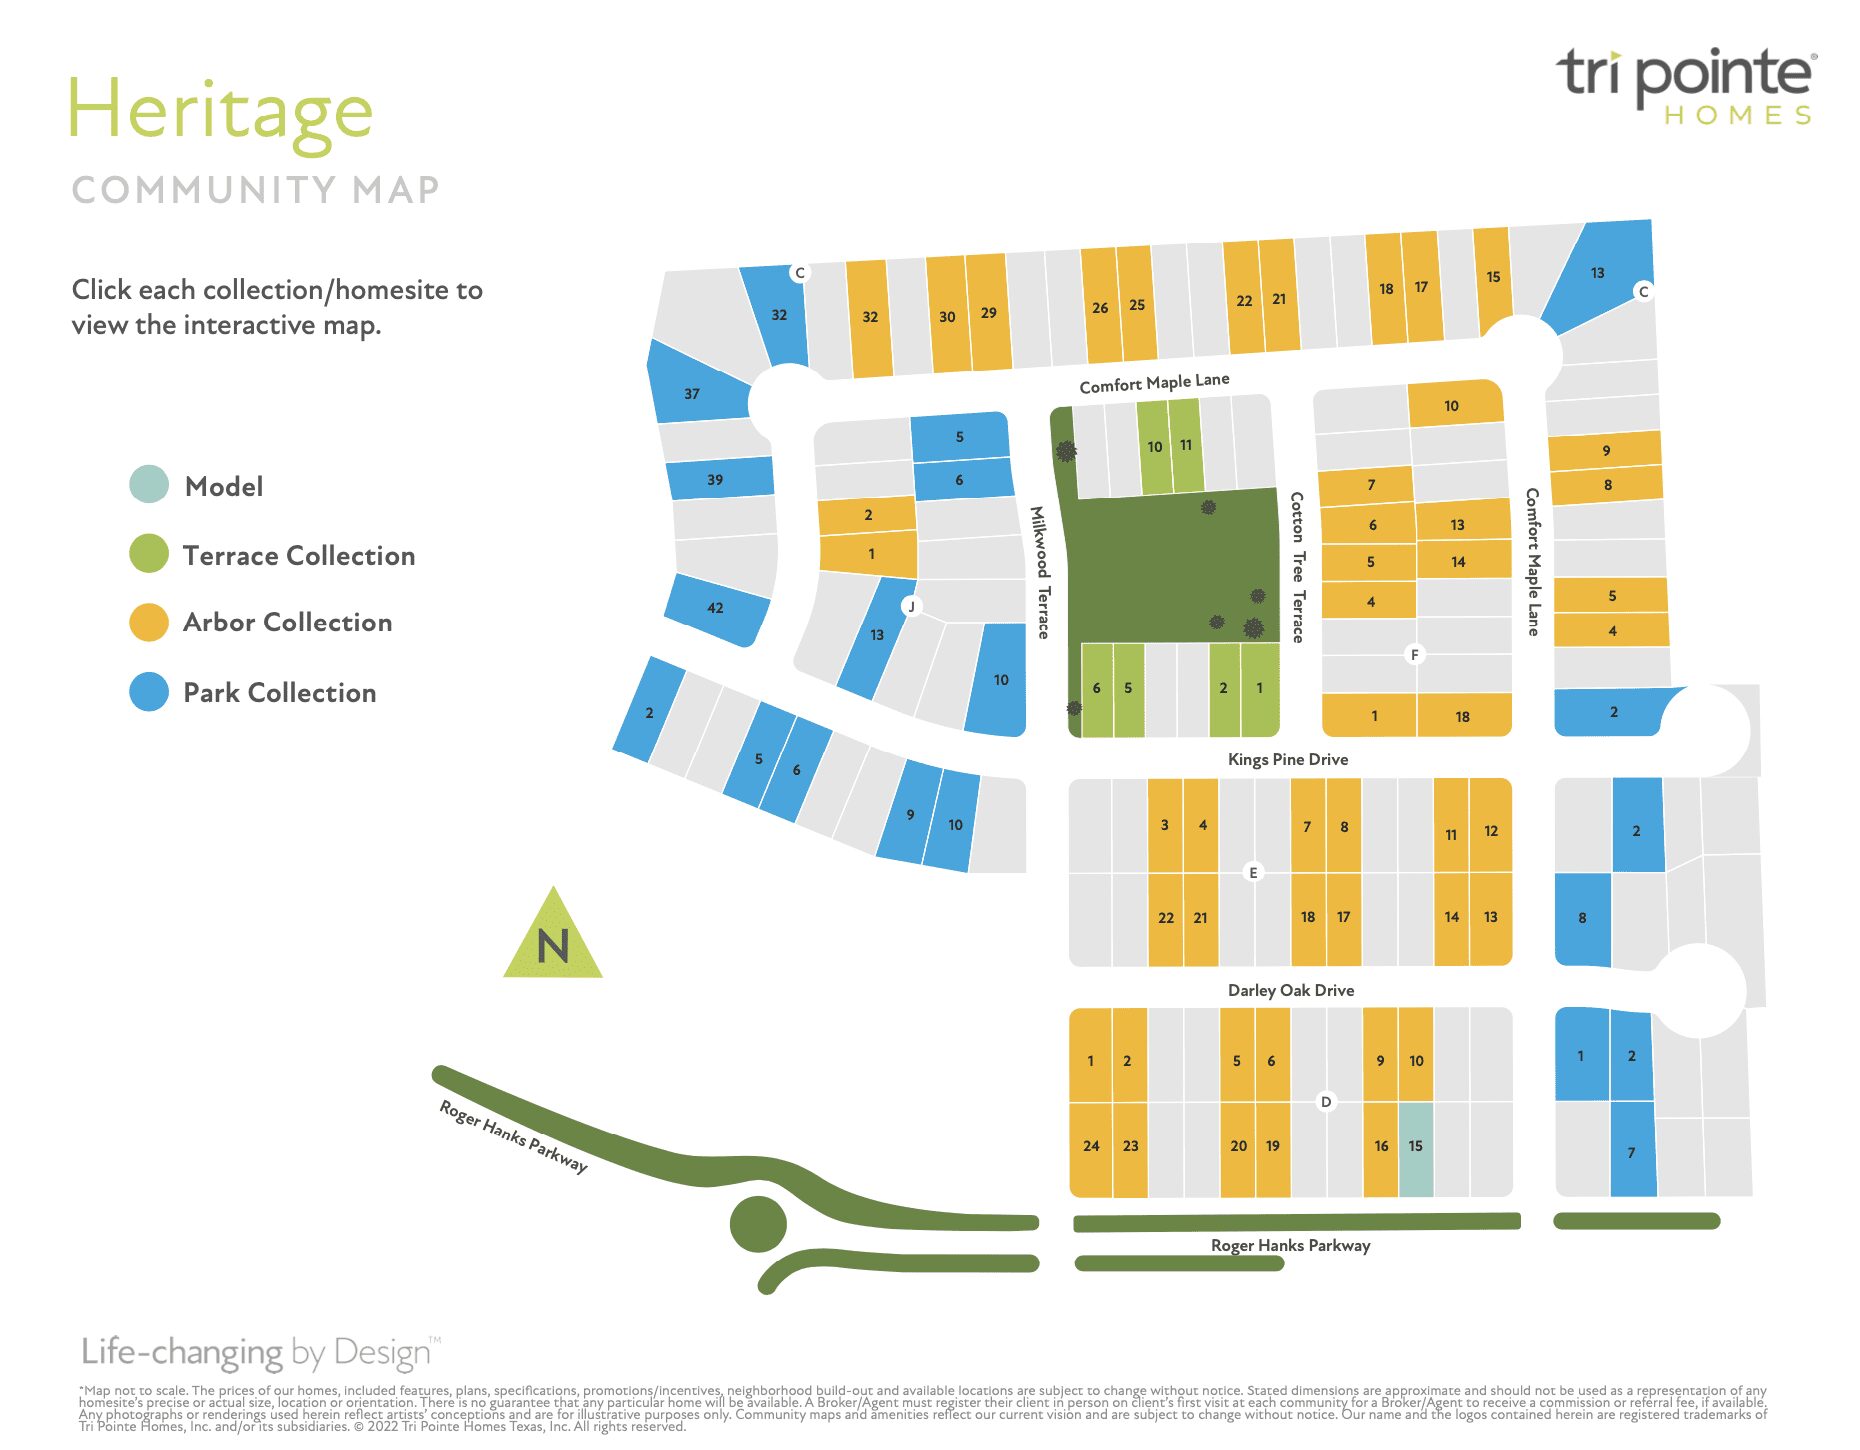 Tripointe home map for Heritage in Dripping Springs